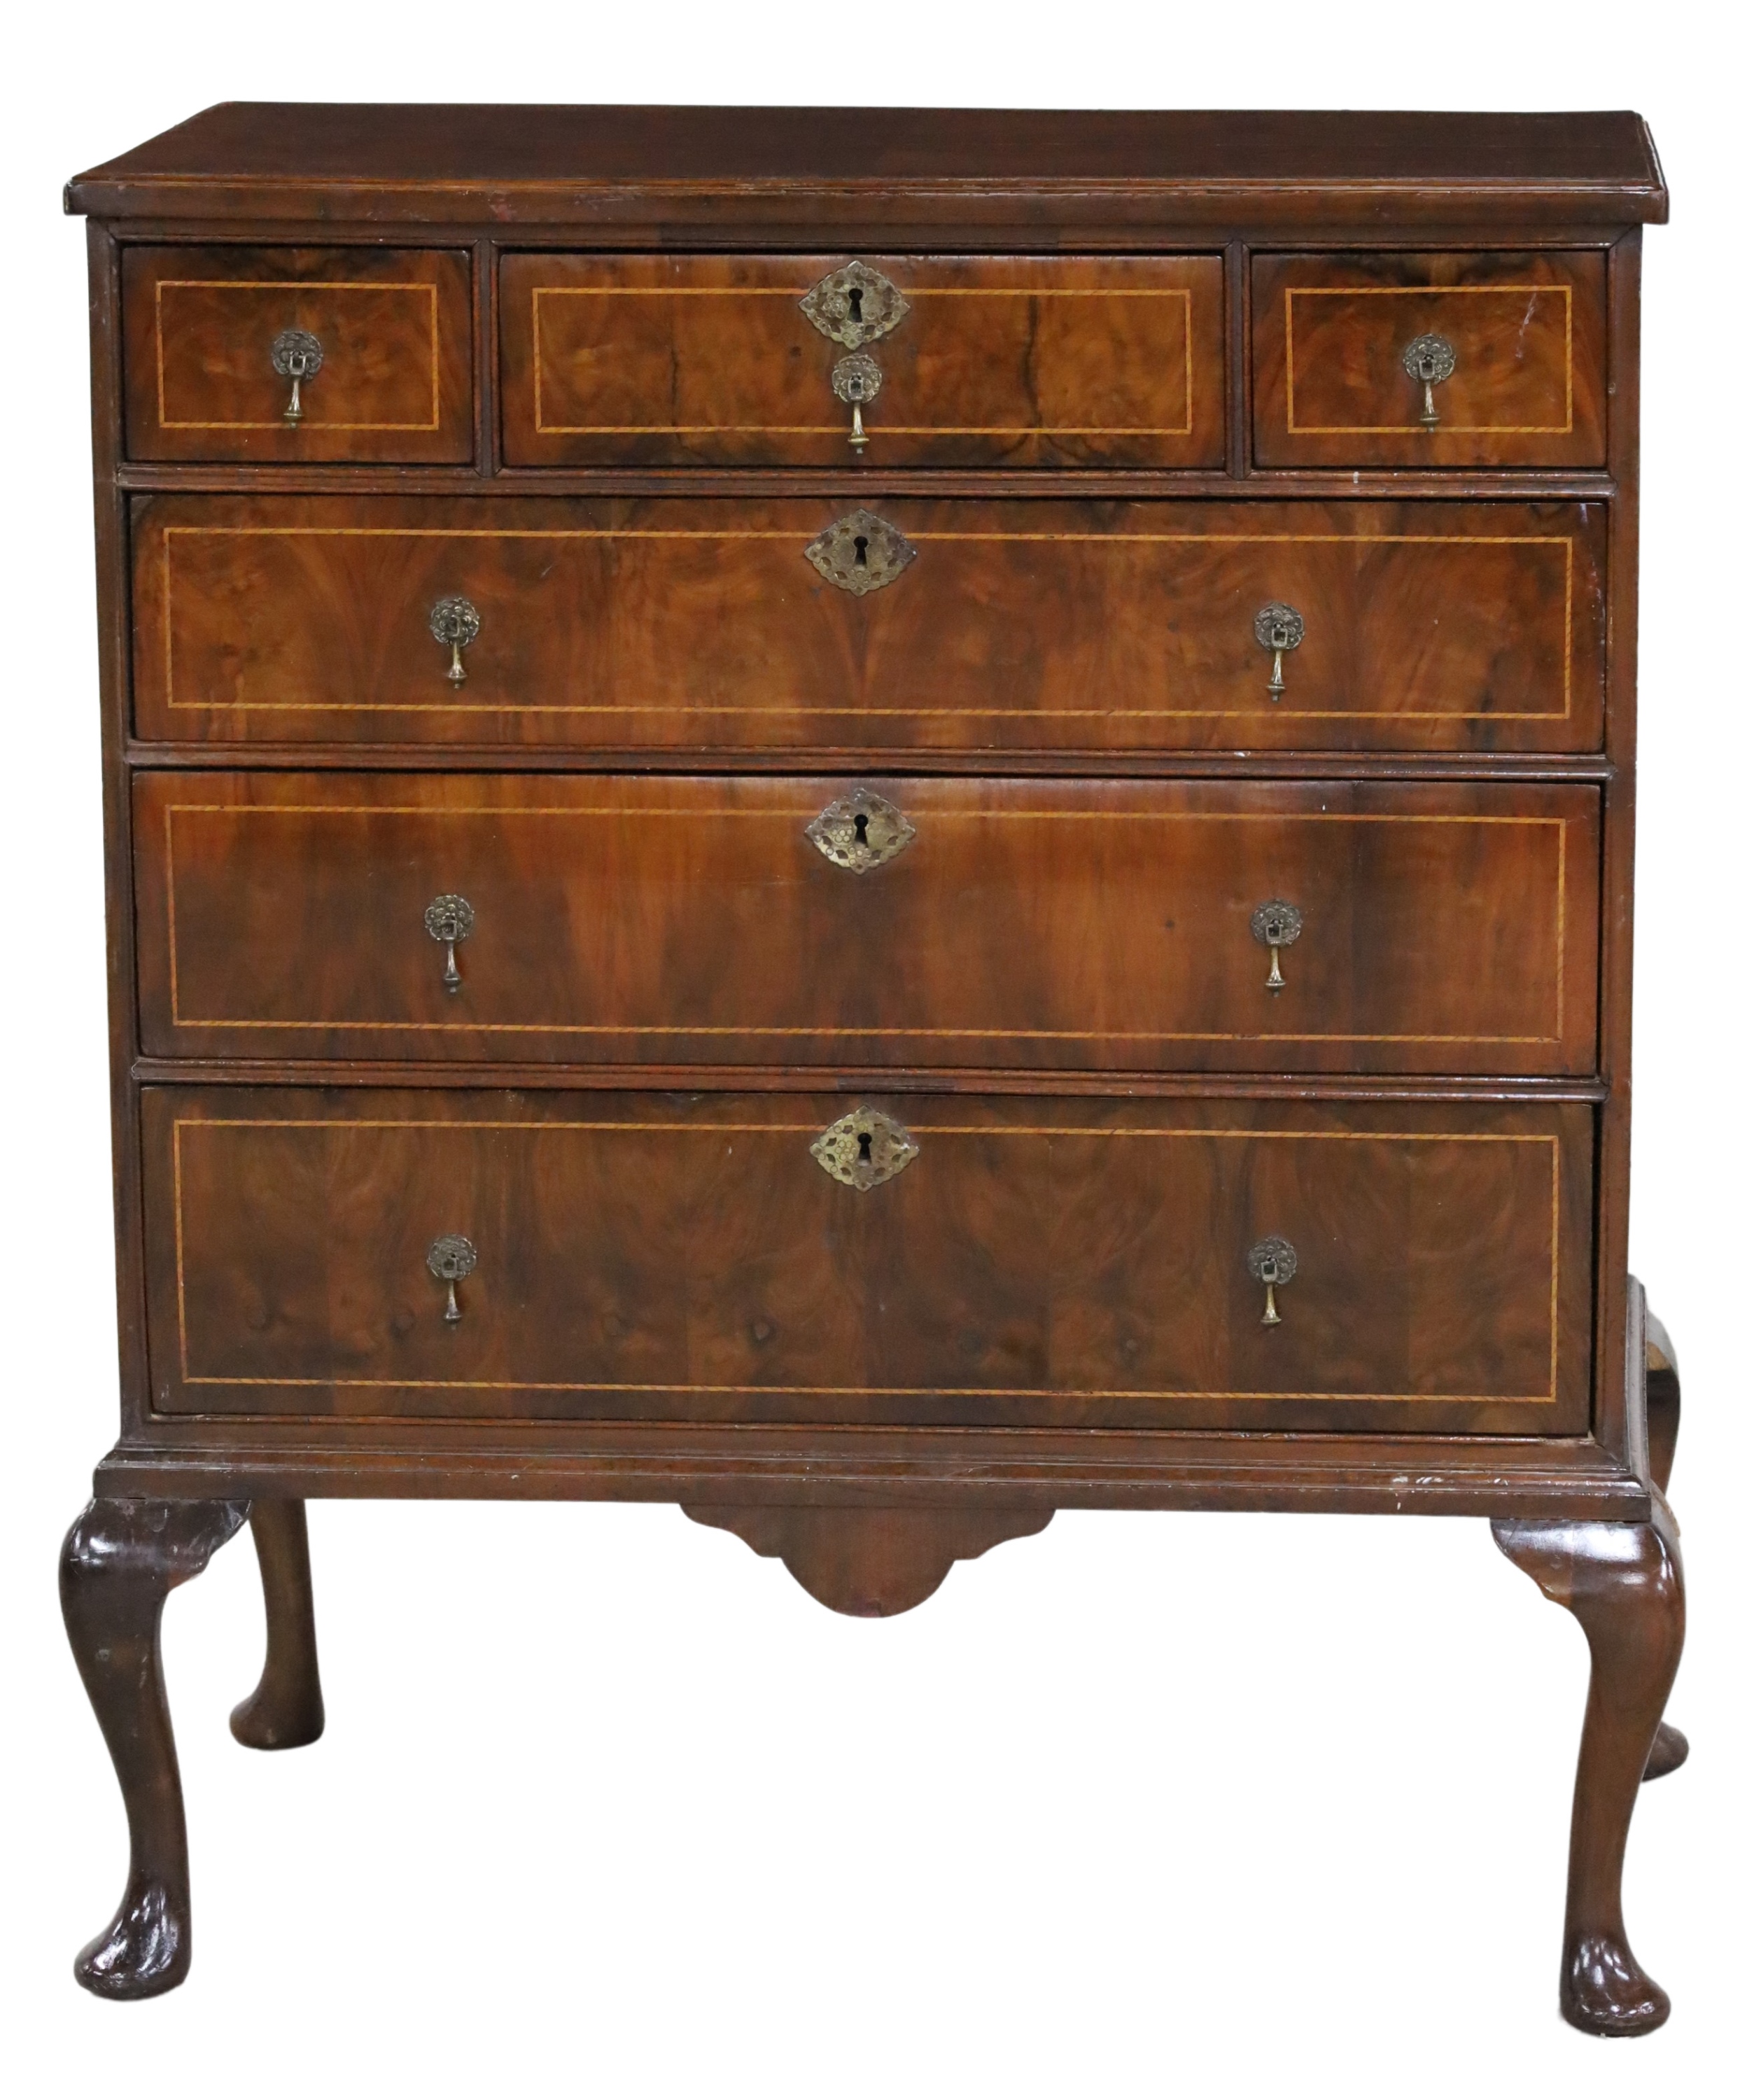 QUEEN ANNE STYLE CHEST ON STAND 2f8d13